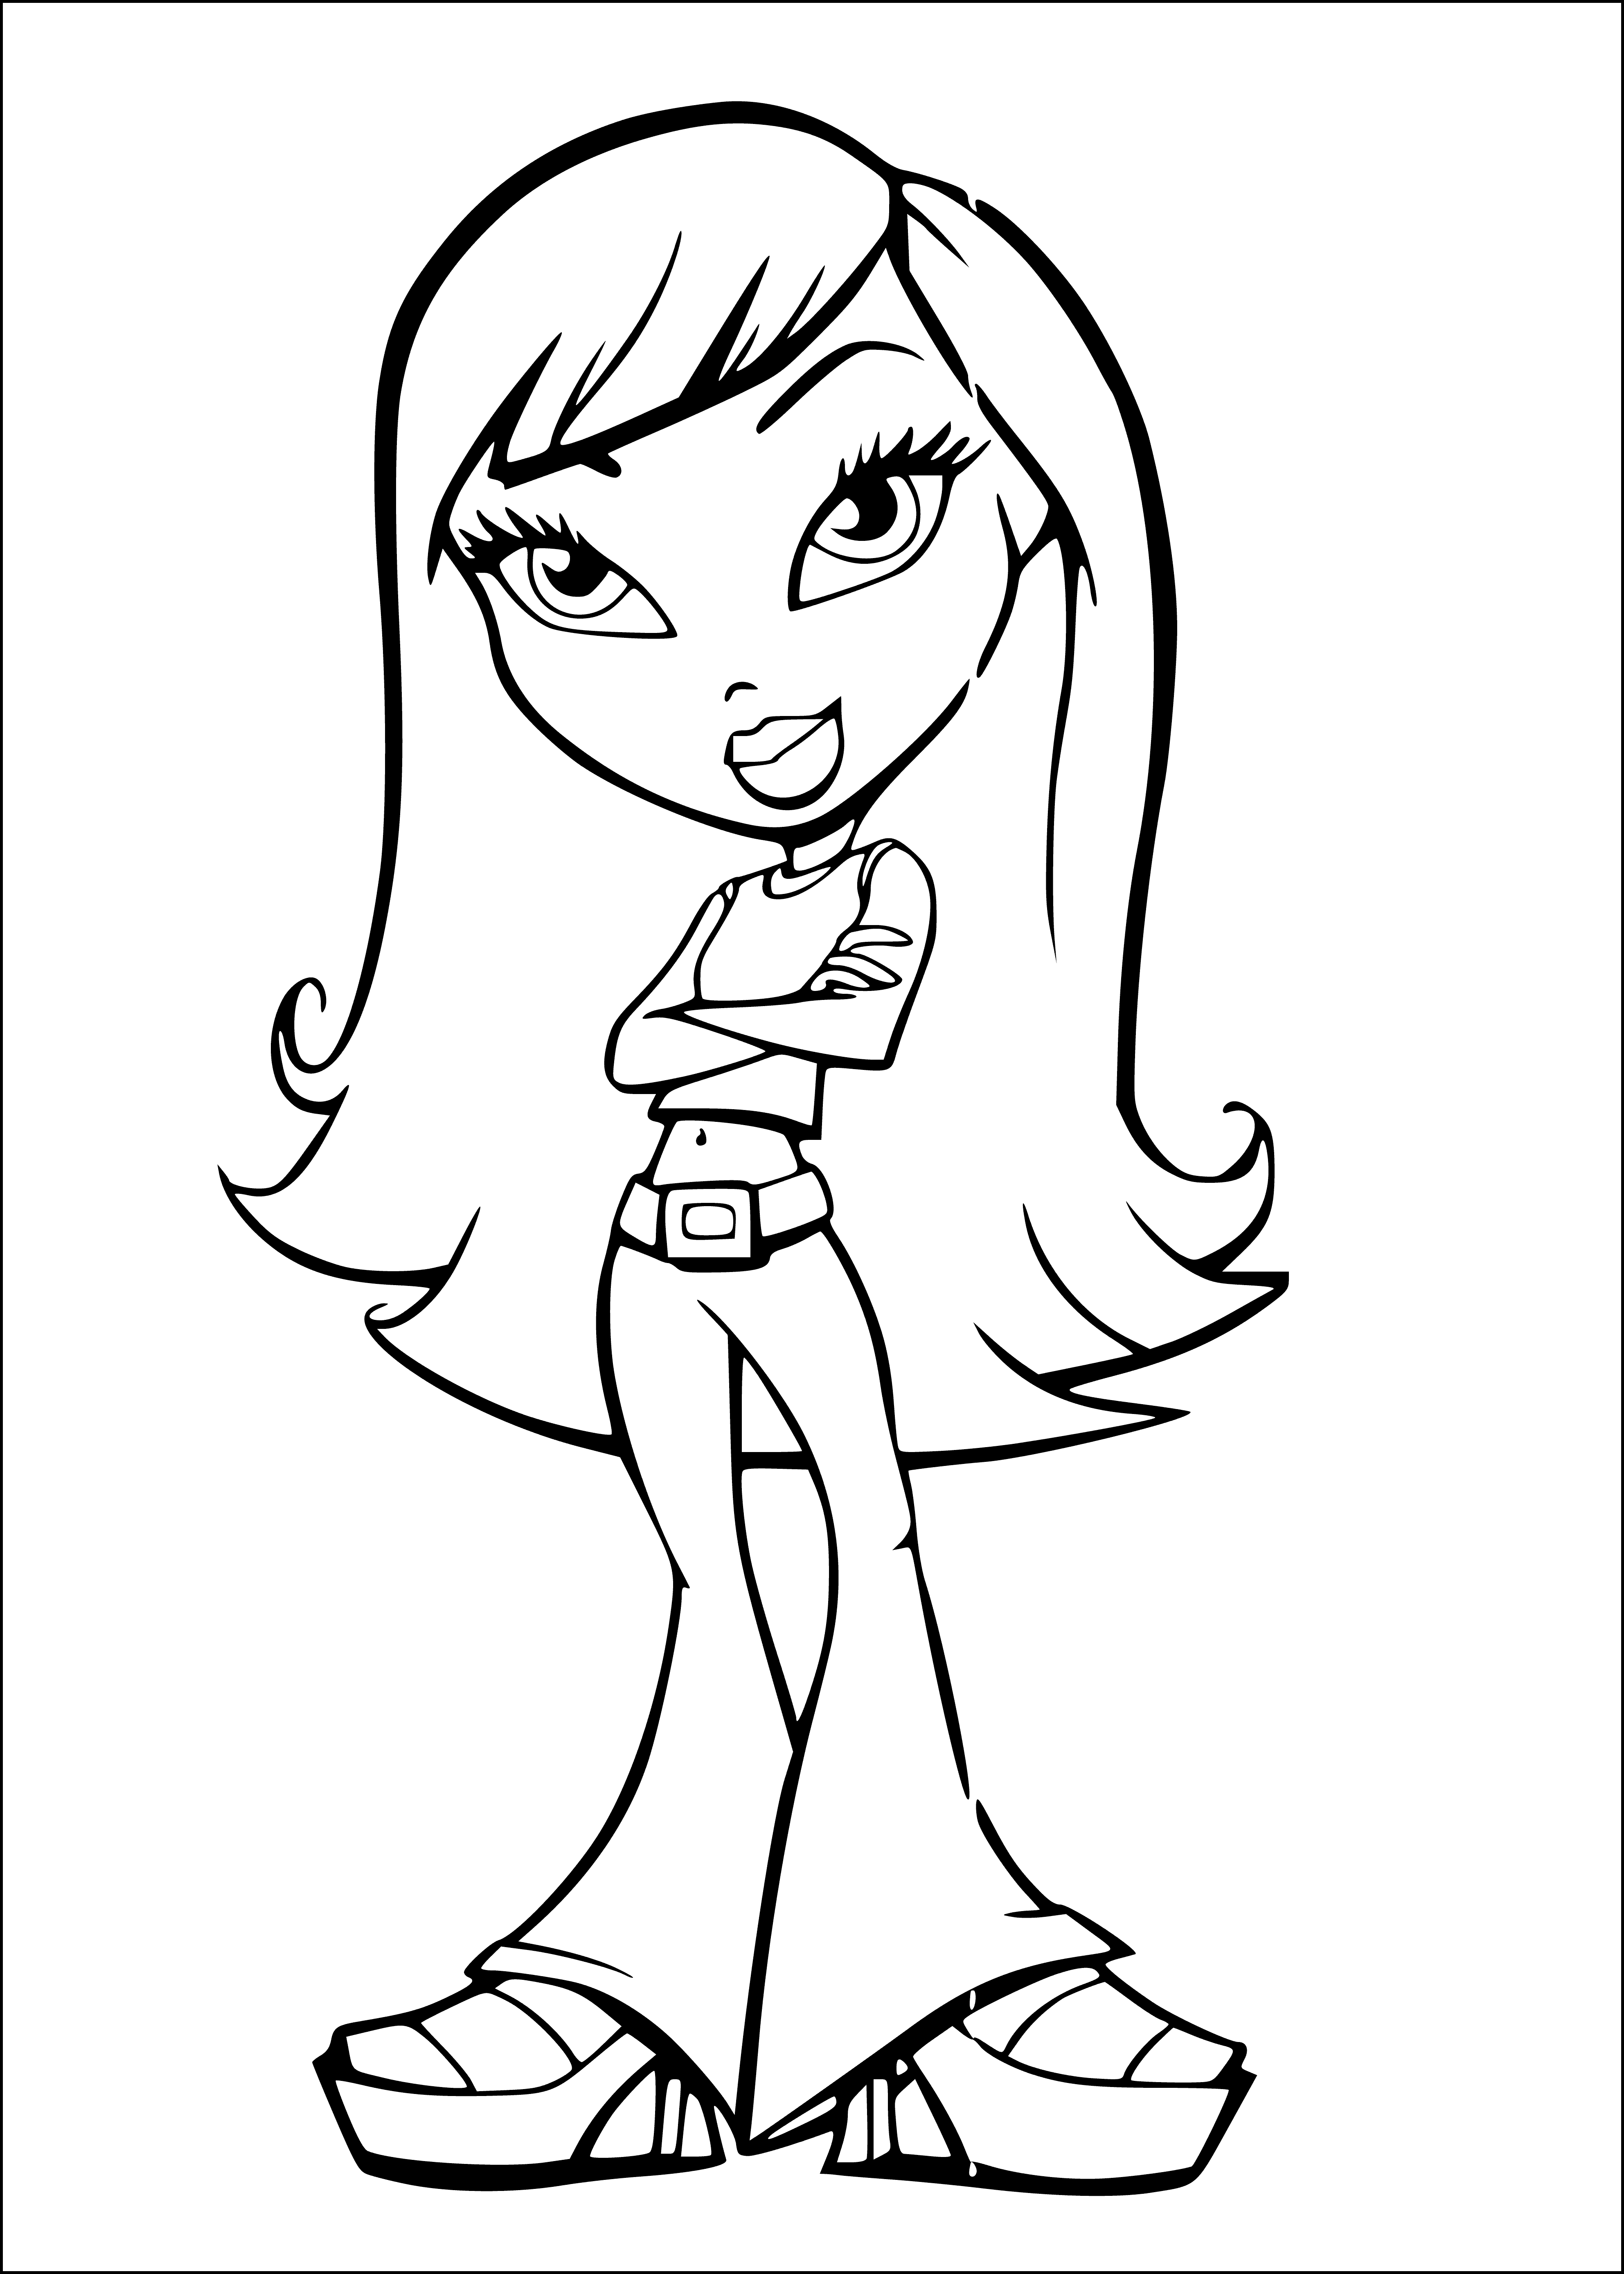 One of the Bratz coloring page